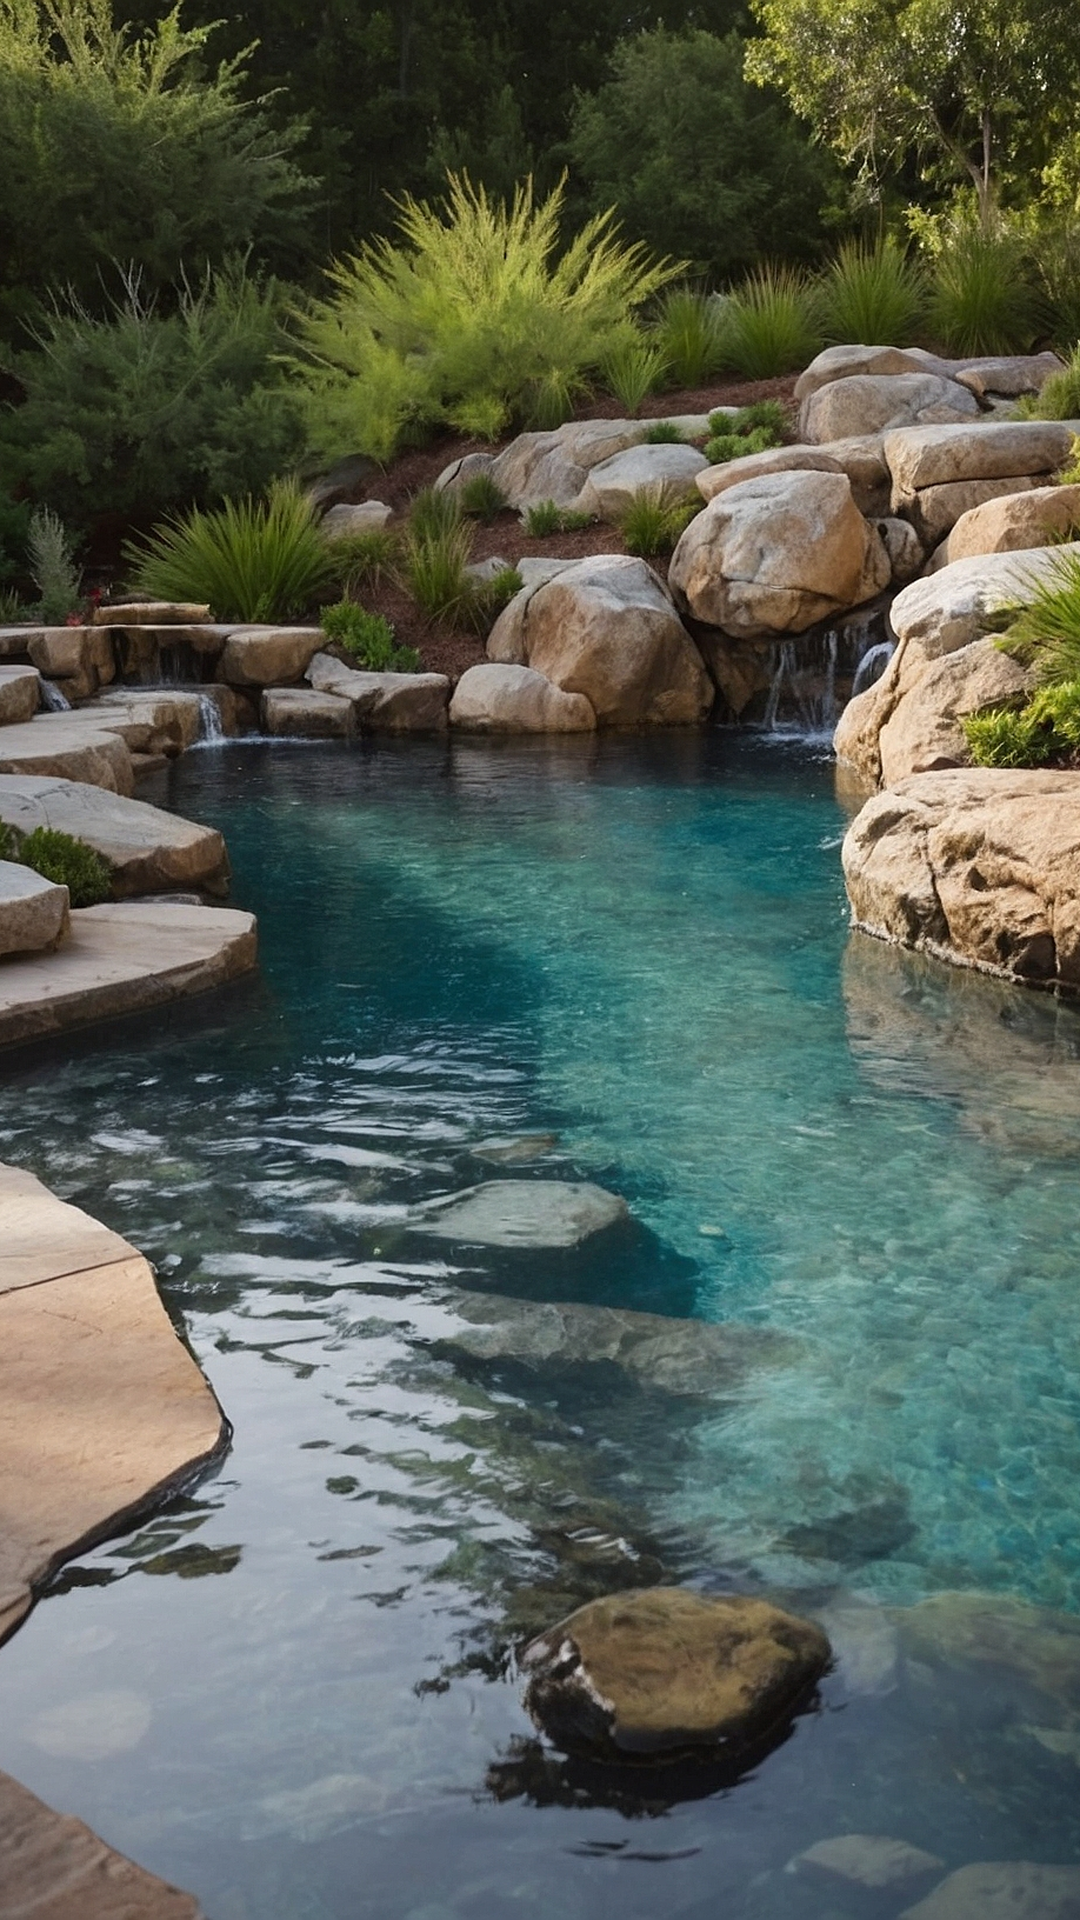 Mosaic Stonescapes: Artistic Landscaping with Large Rocks